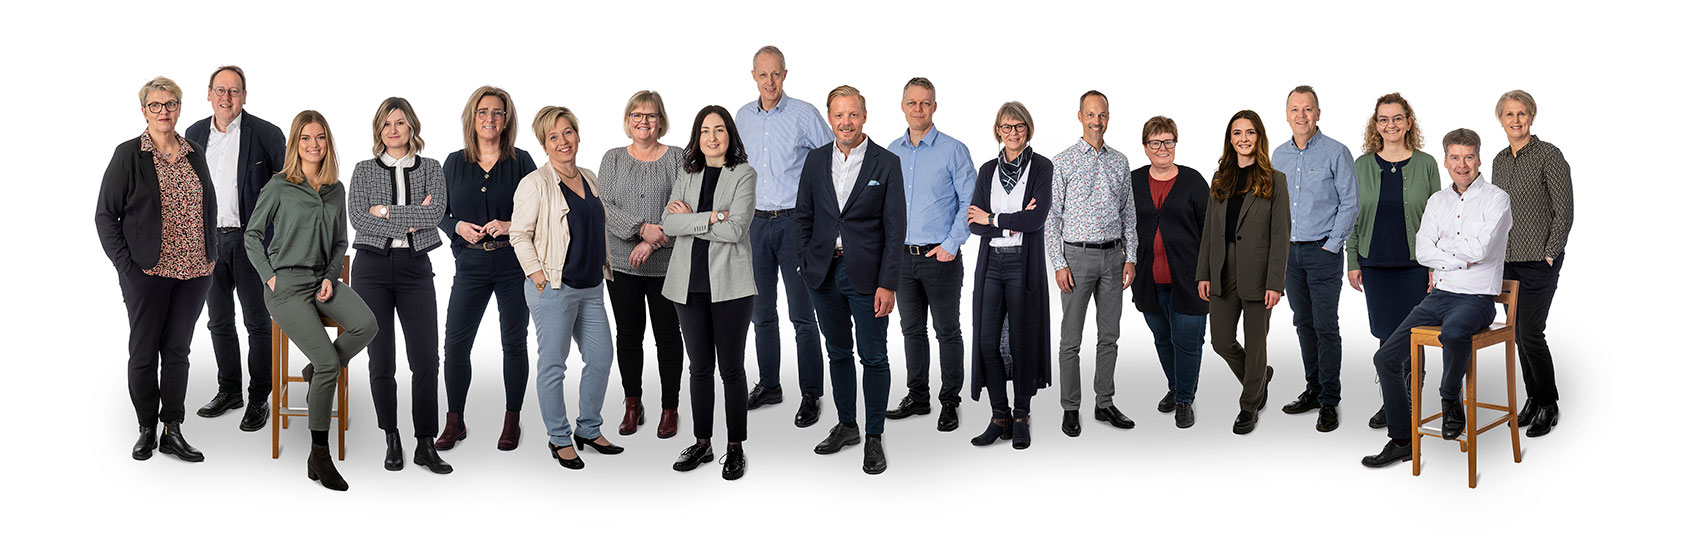 All employees of Vimmerby Sparbank